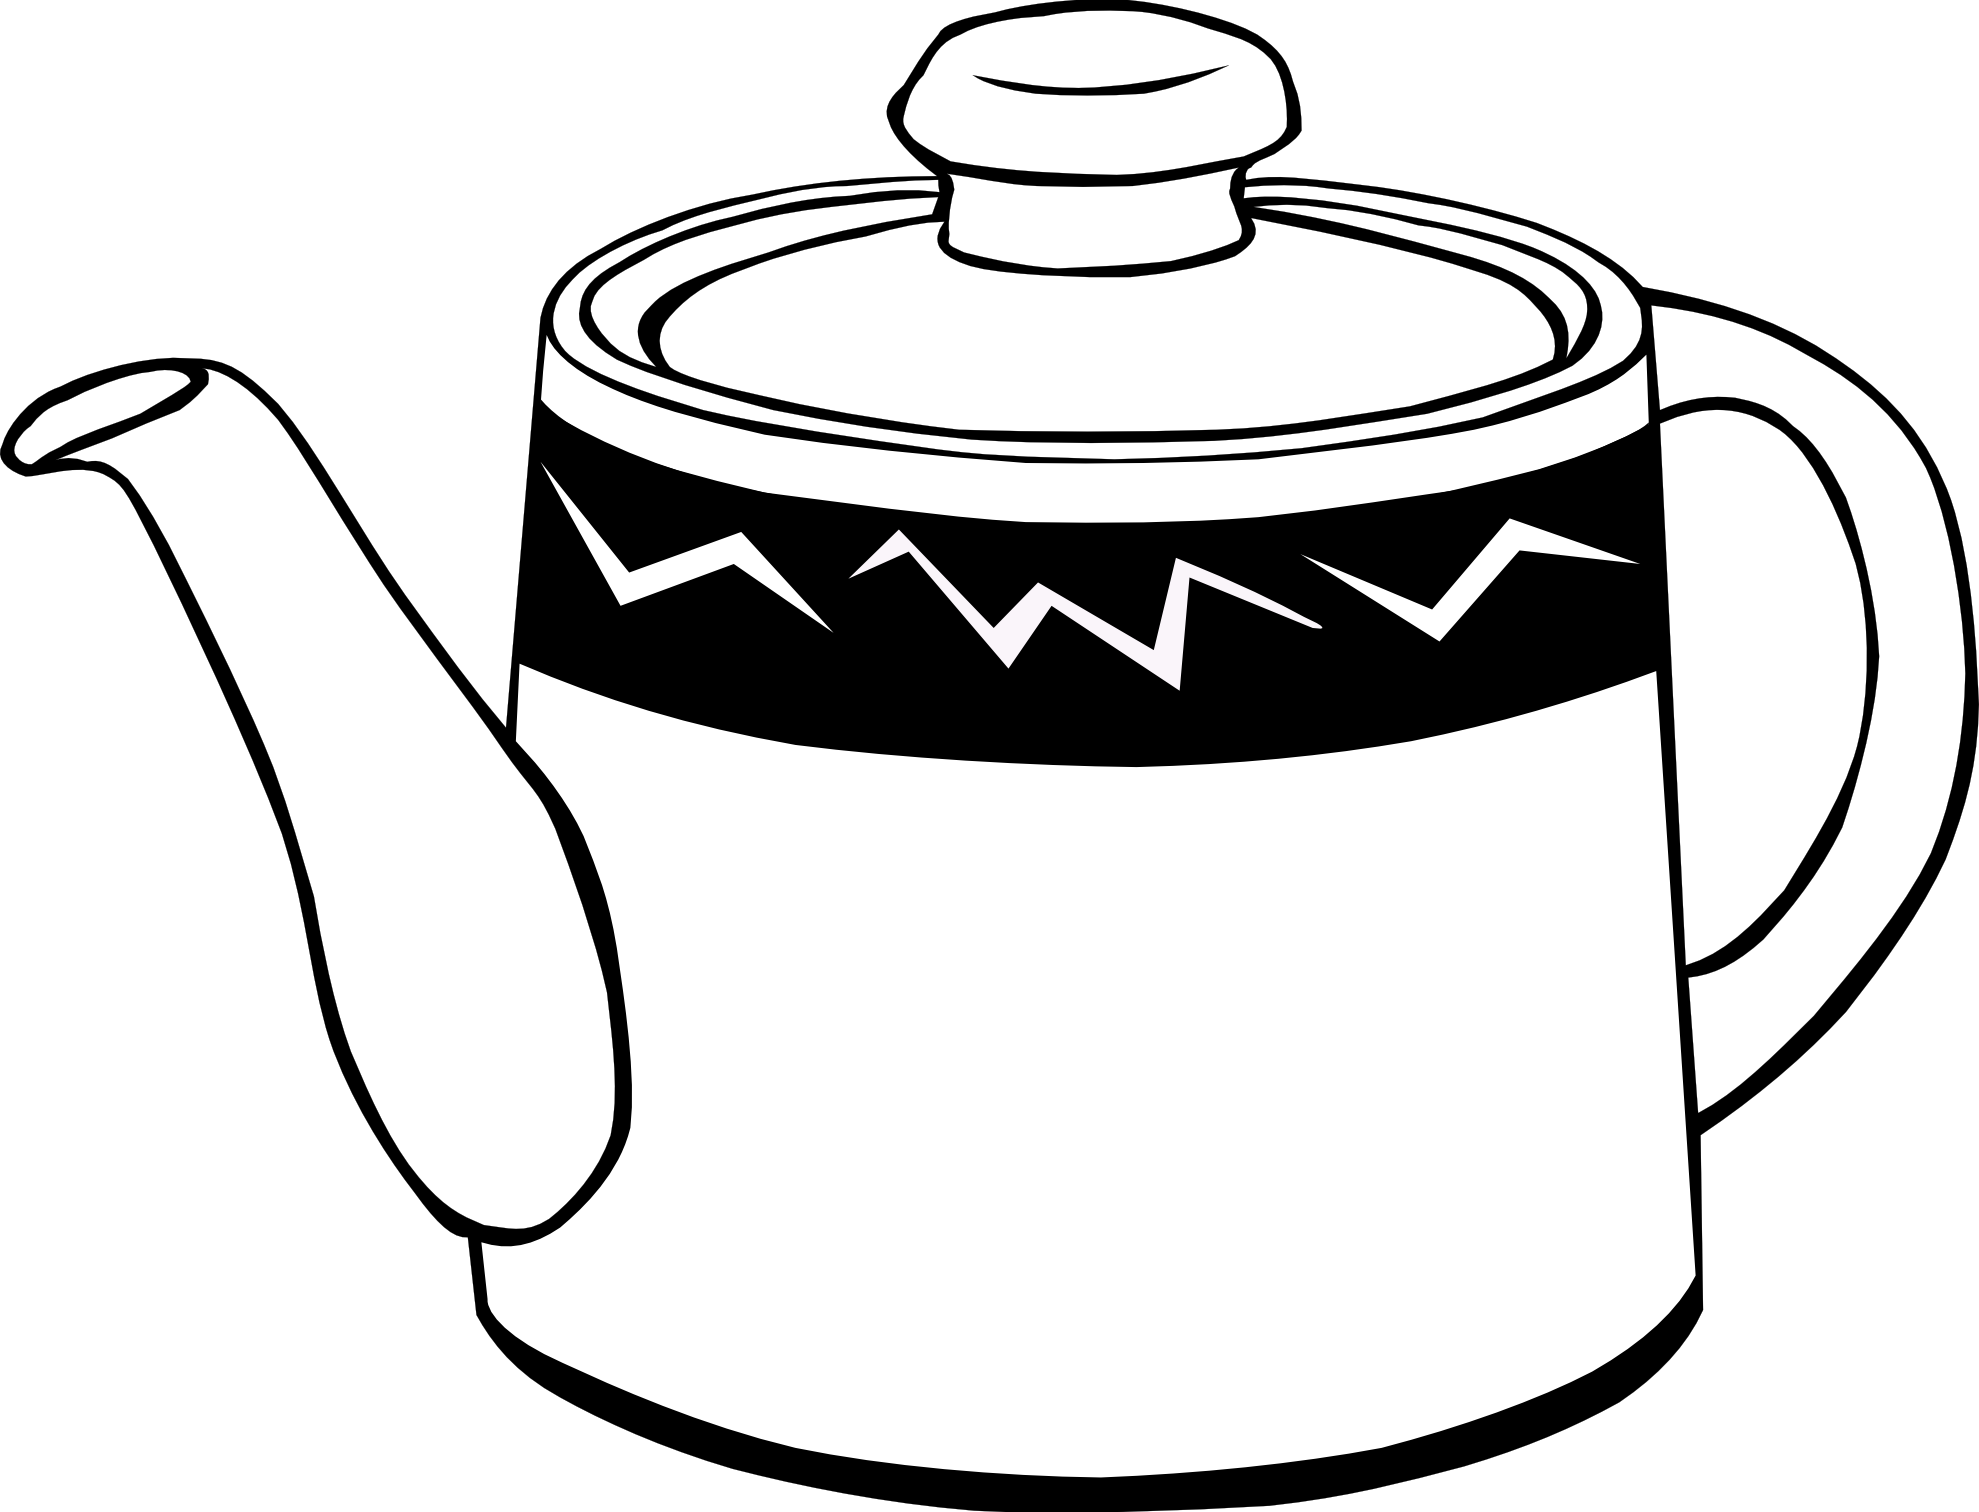 Black and white clipart pretend food and dishes - ClipartFox